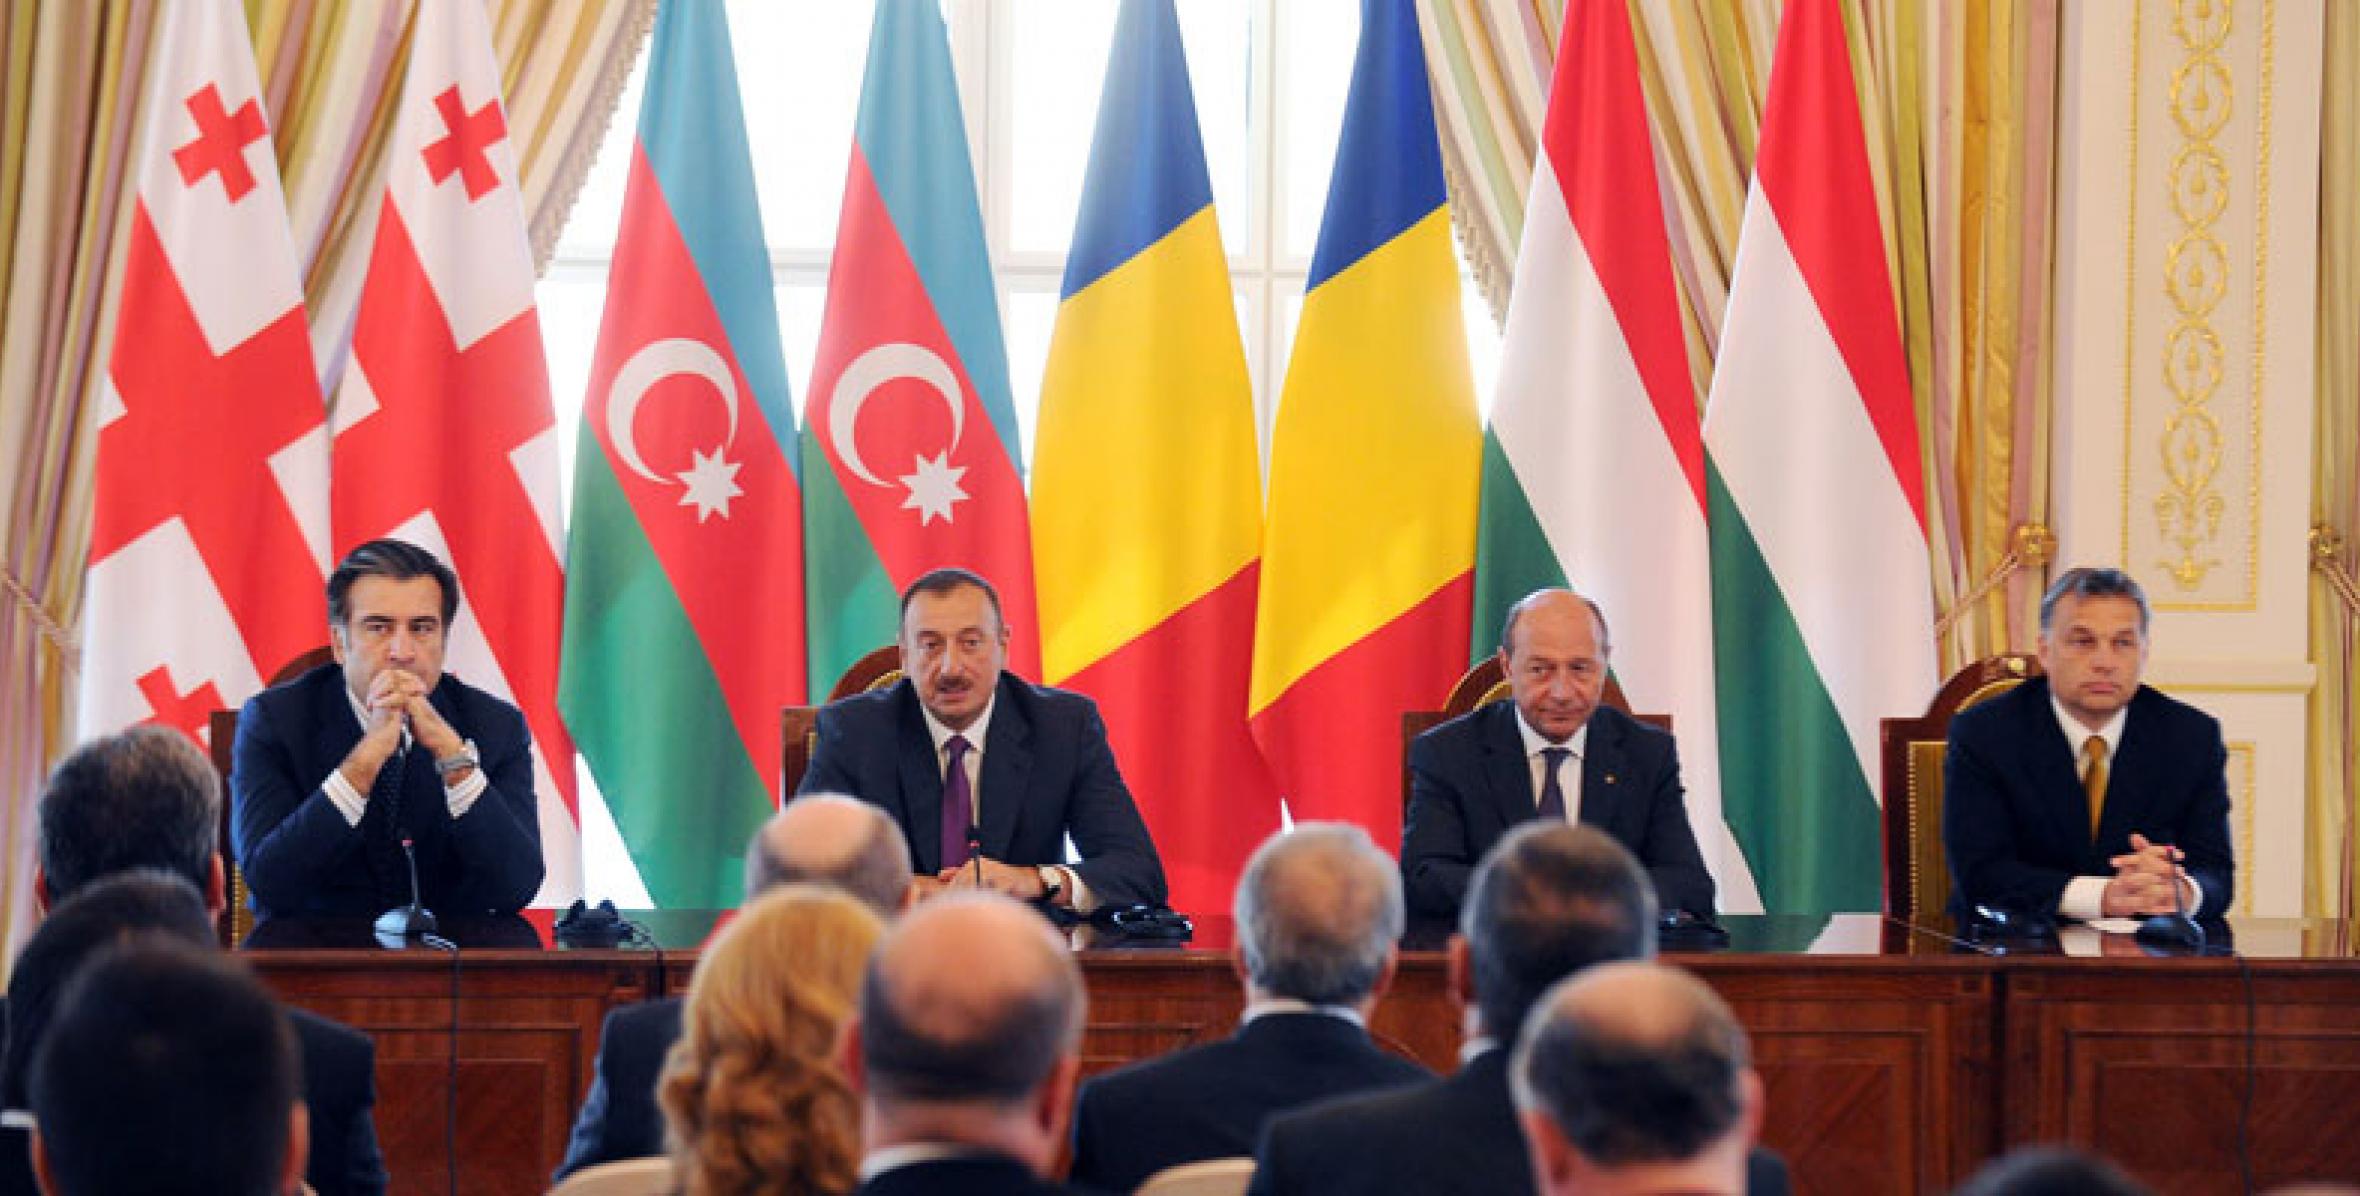 Joint press conference of the state and government leaders of Azerbaijan, Romania, Georgia and Hungary